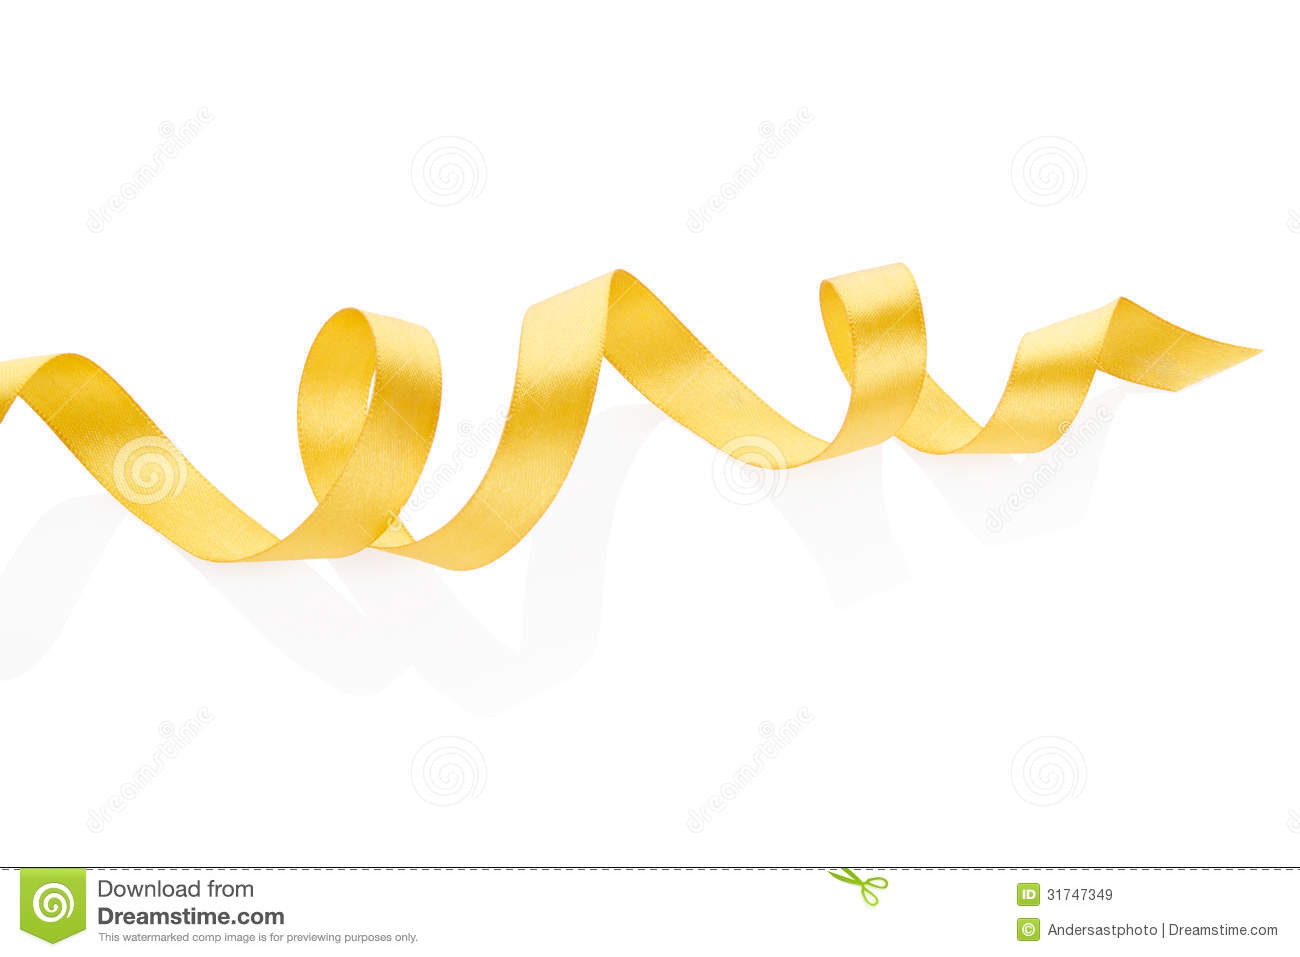 Golden Curly Ribbon Royalty Free Stock Images   Image  31747349